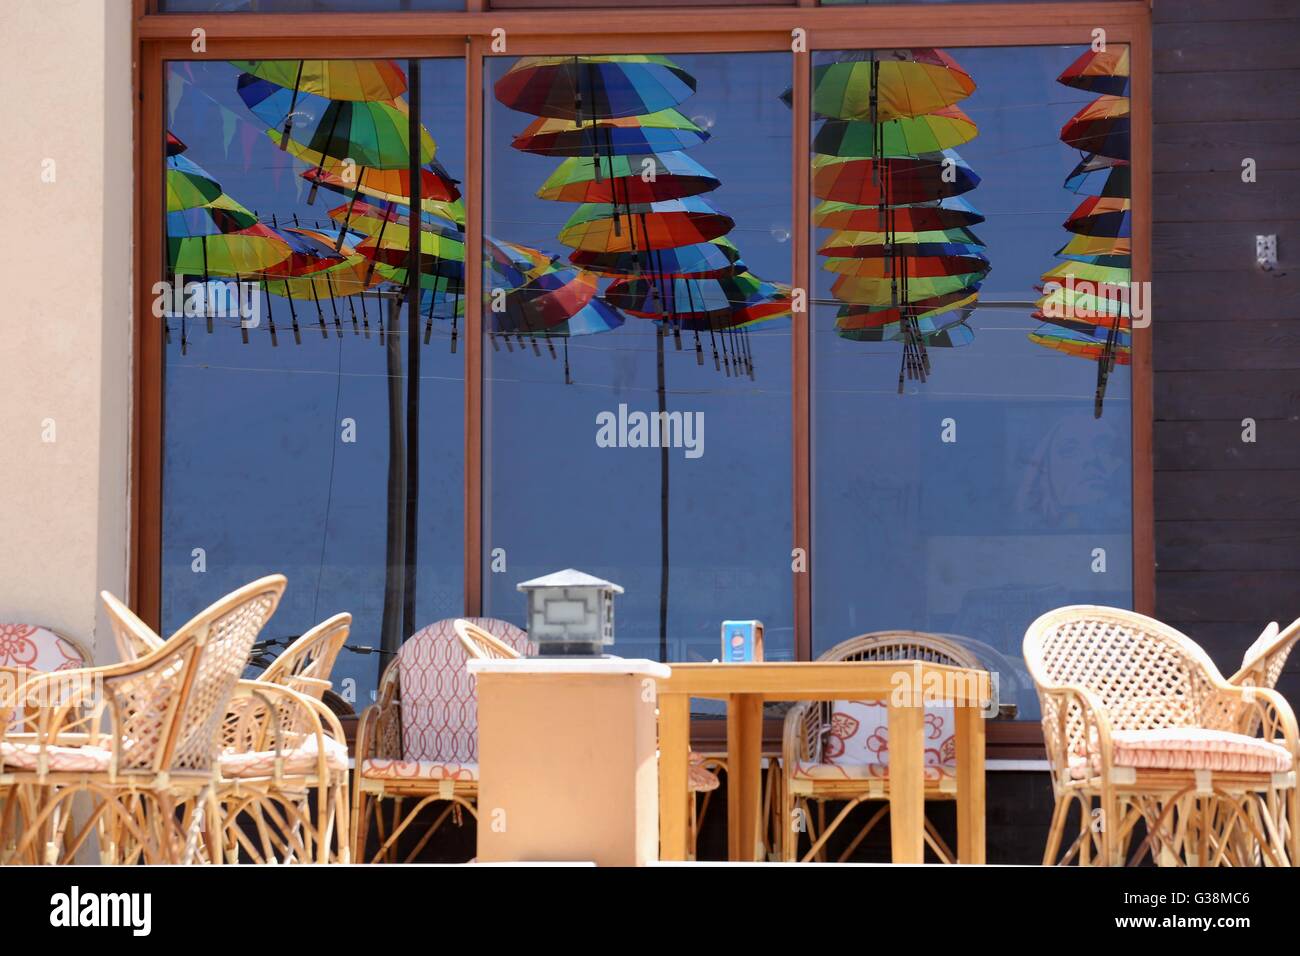 Gaza City, Gaza Strip, Palestinian Territory. 9th June, 2016. A Picture taken in June 9, 2016 shows beachside café shop was decorate its terrace with hanging colourful umbrellas as part of decorations for the Muslim holy fasting month of Ramadan in Gaza City. Ramadan is sacred to Muslims because it is during that month that tradition says the Koran was revealed to the Prophet Mohammed. The fast is one of the five main religious obligations under Islam. More than 1. Credit:  ZUMA Press, Inc./Alamy Live News Stock Photo